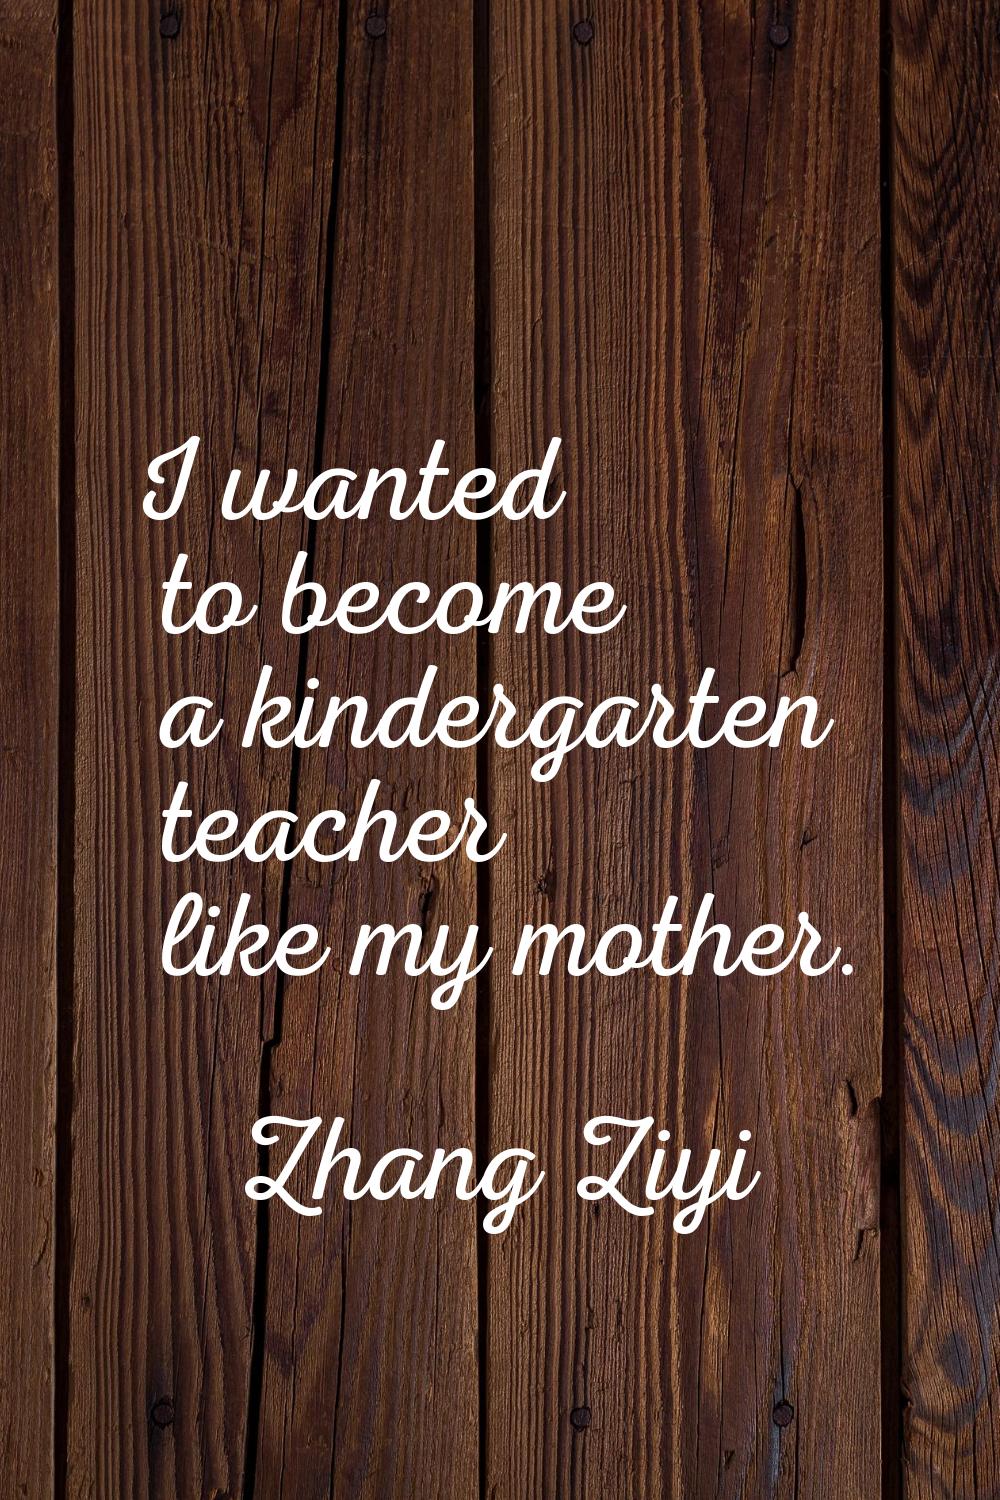 I wanted to become a kindergarten teacher like my mother.